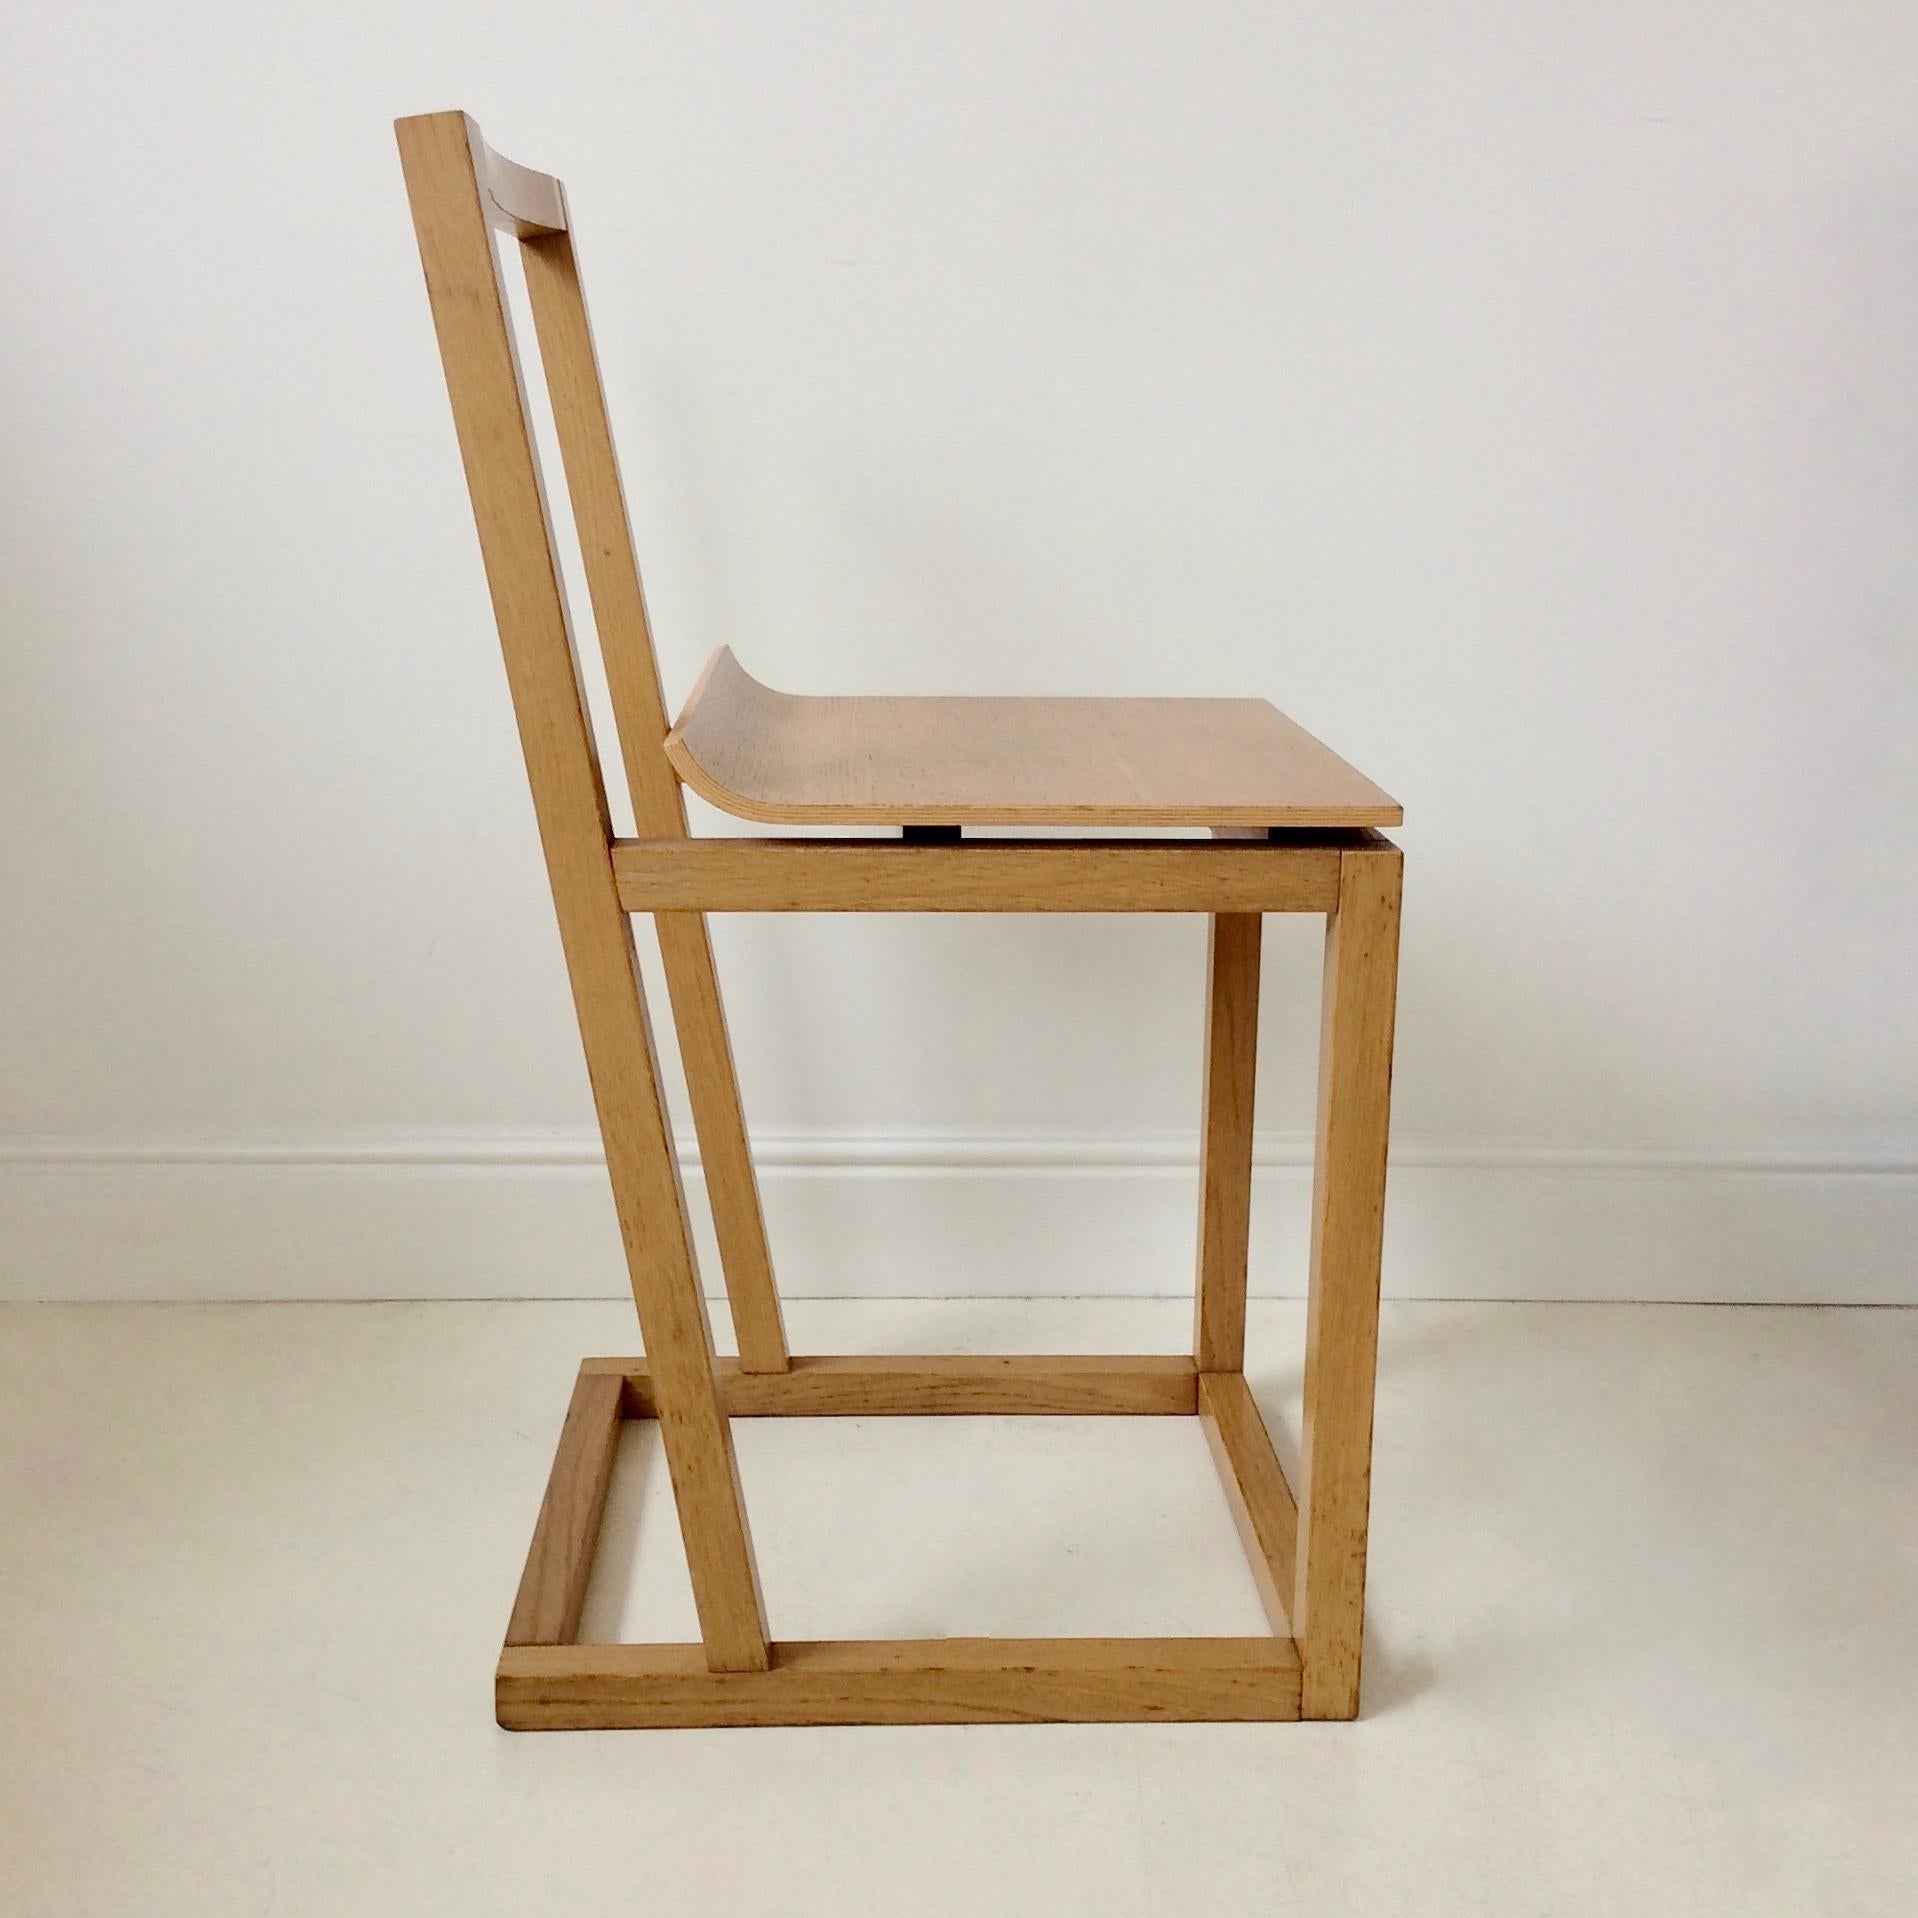 Rare minimalist and post-modern chair, circa 1980, Italy.
Light oak solid wood and plywood seat.
2 chairs available.
Dimensions: 75 cm H, 42 cm D, 38 cm W, seat height: 46 cm.
All purchases are covered by our Buyer Protection Guarantee.
This